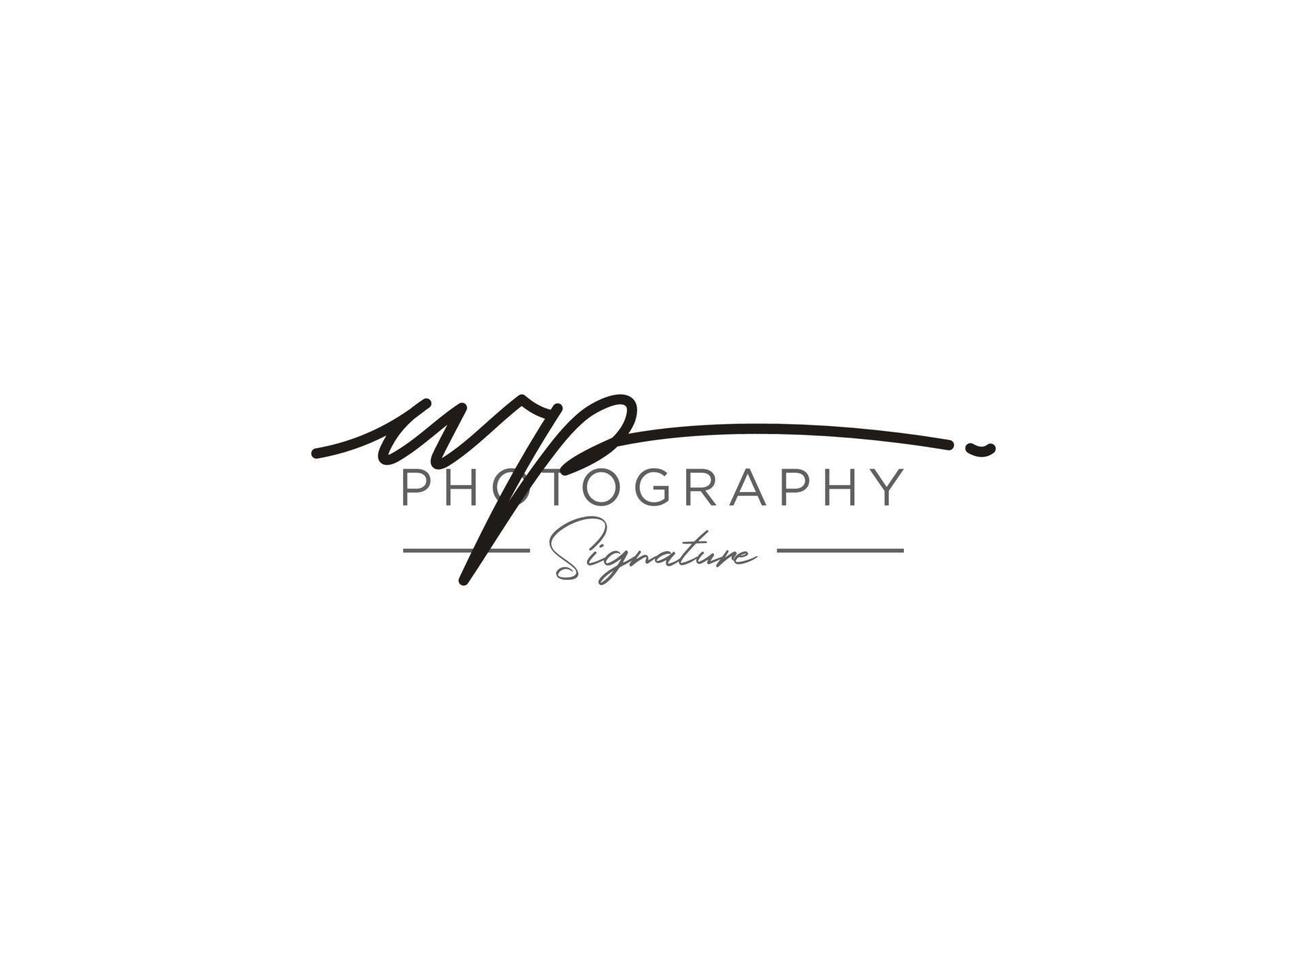 Letter WP Signature Logo Template Vector